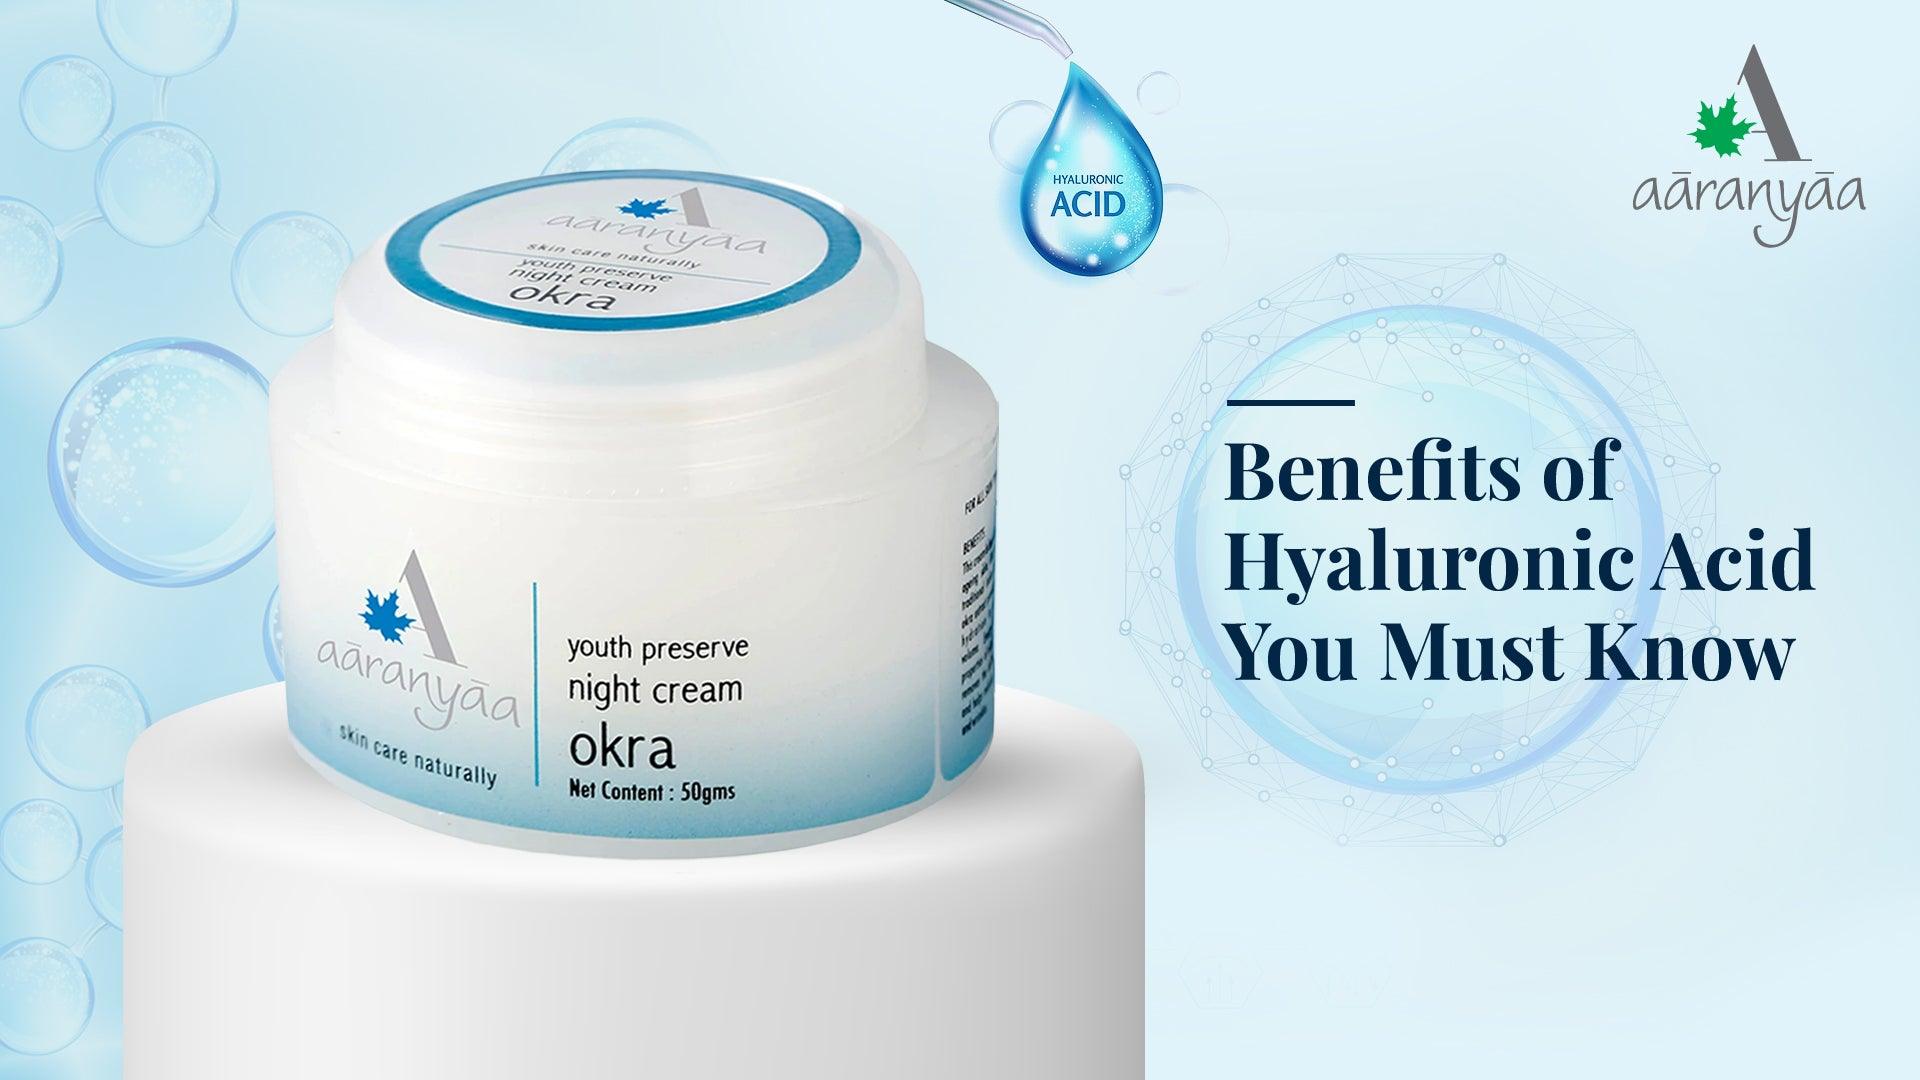 Benefits of Hyaluronic Acid You Must Know - aaranyaa skincare